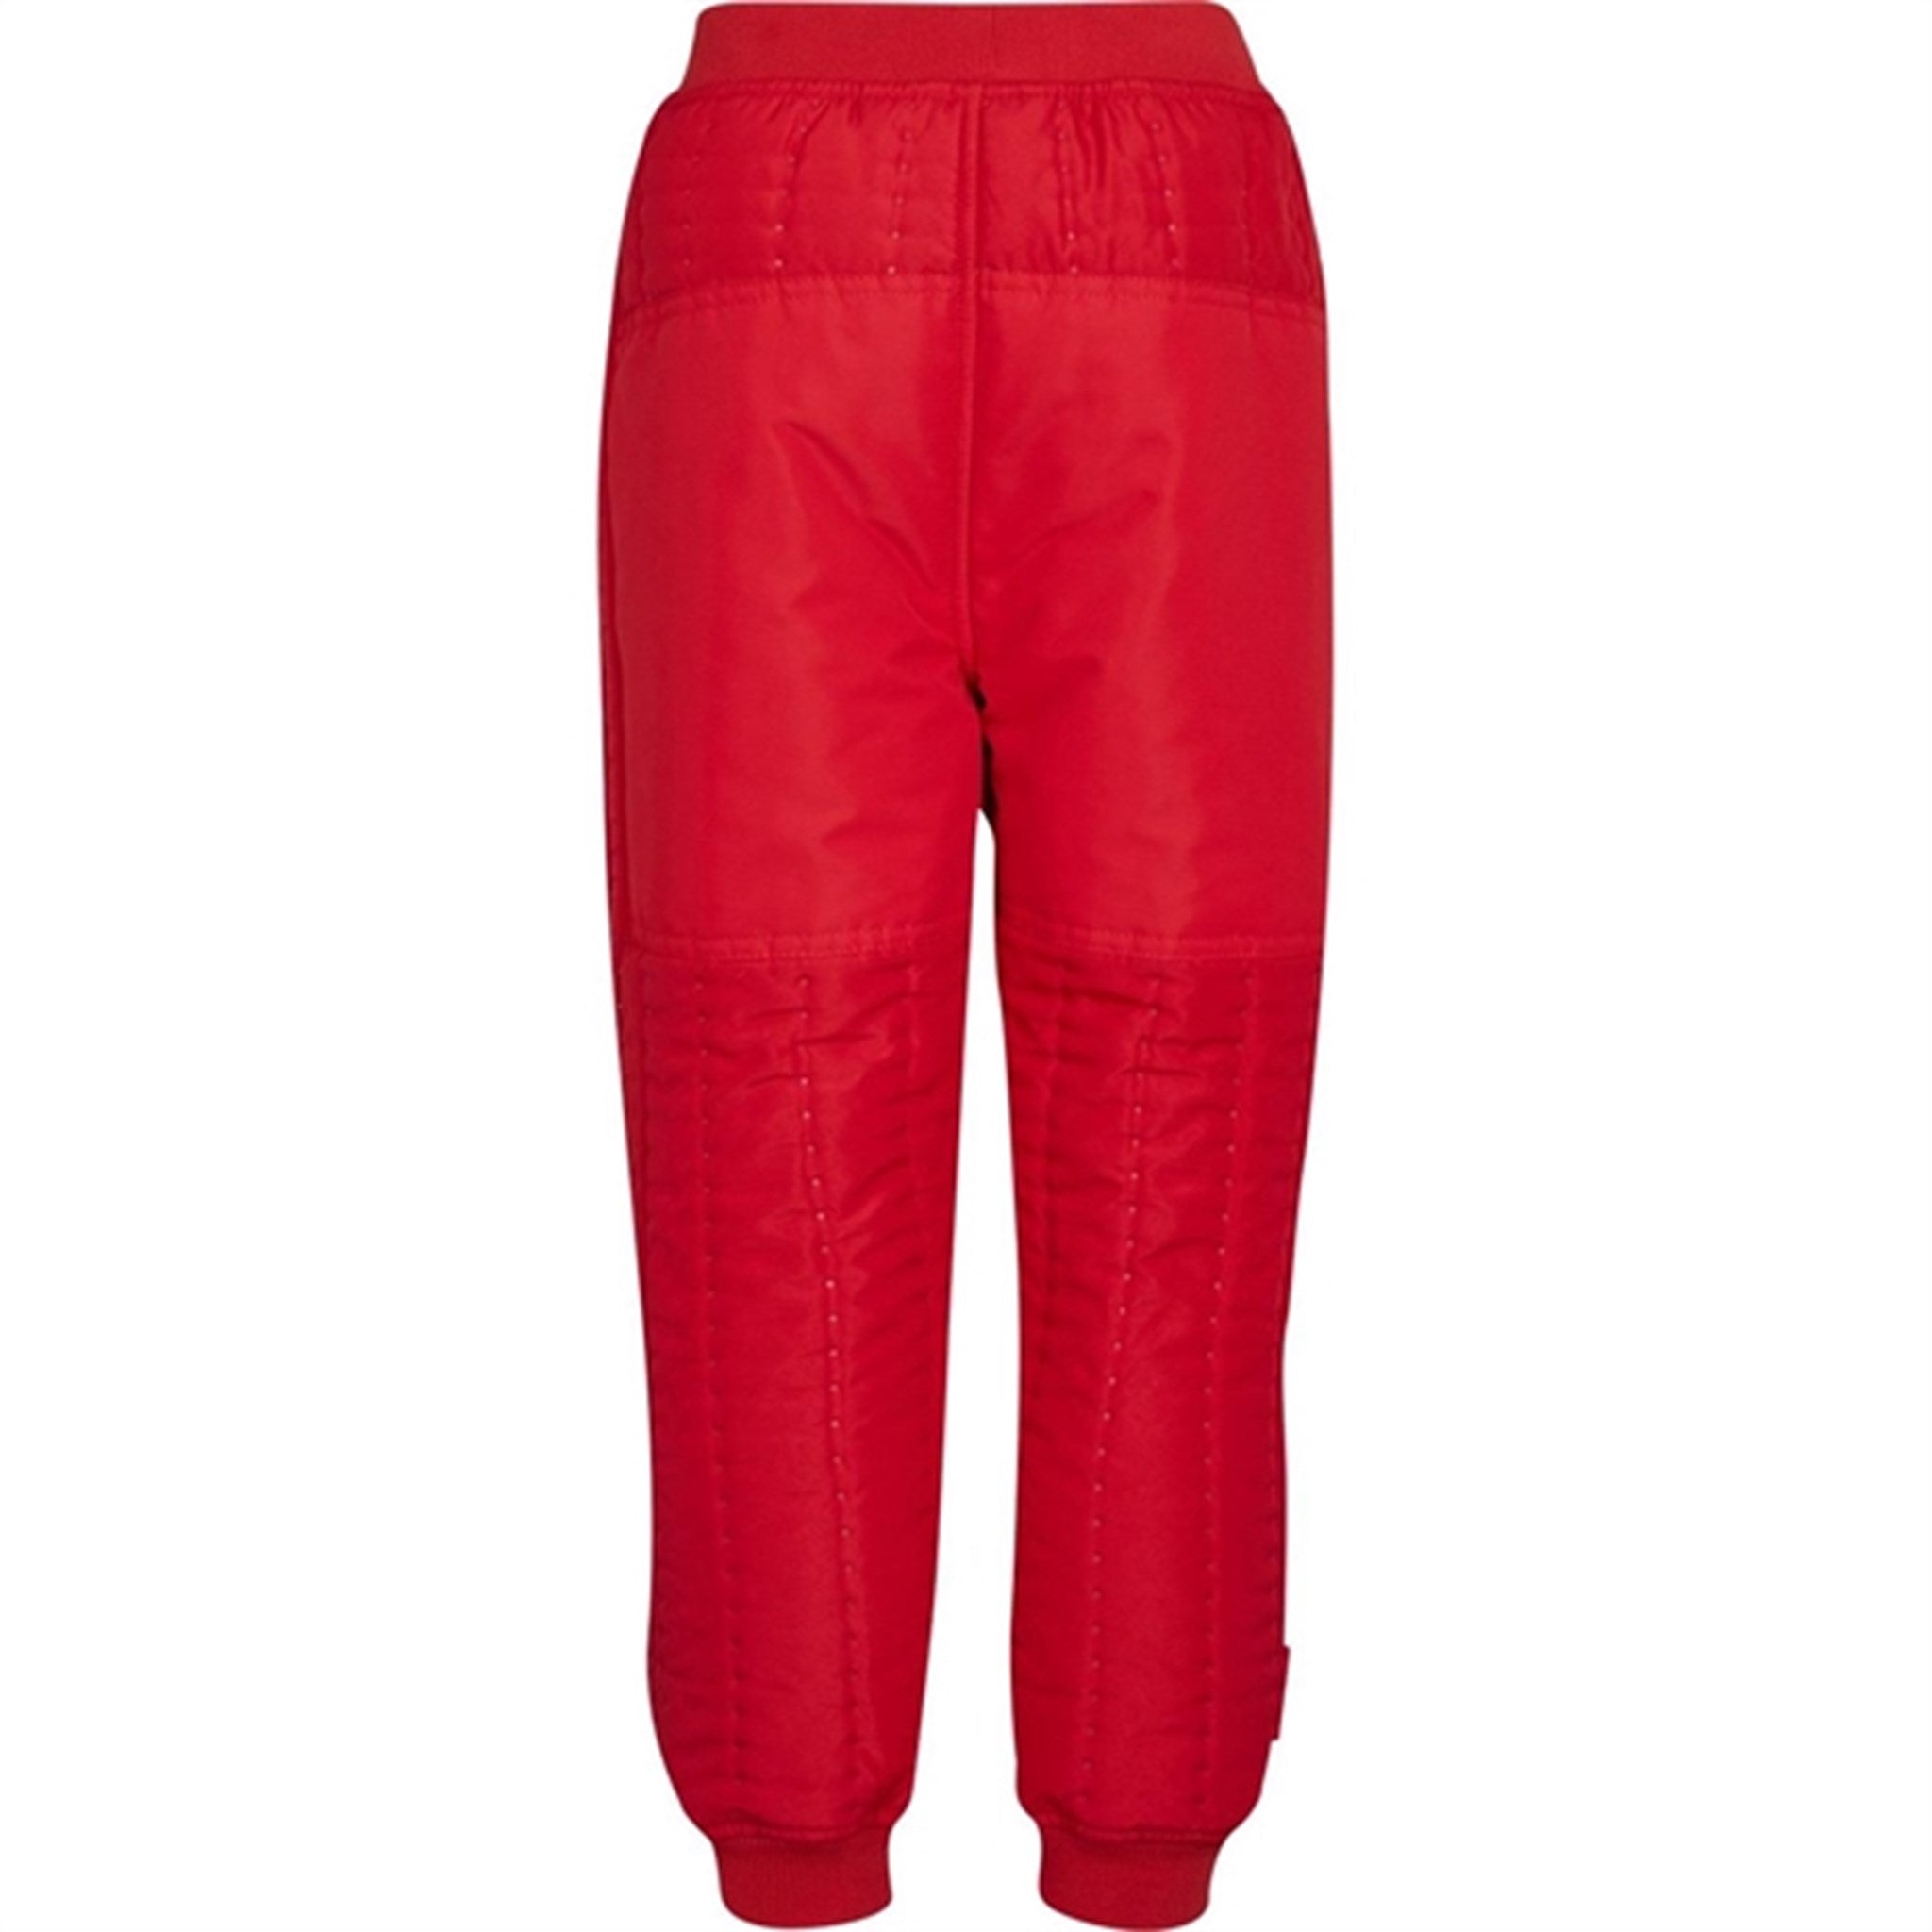 MarMar Red Currant Odin Thermo Pants 2